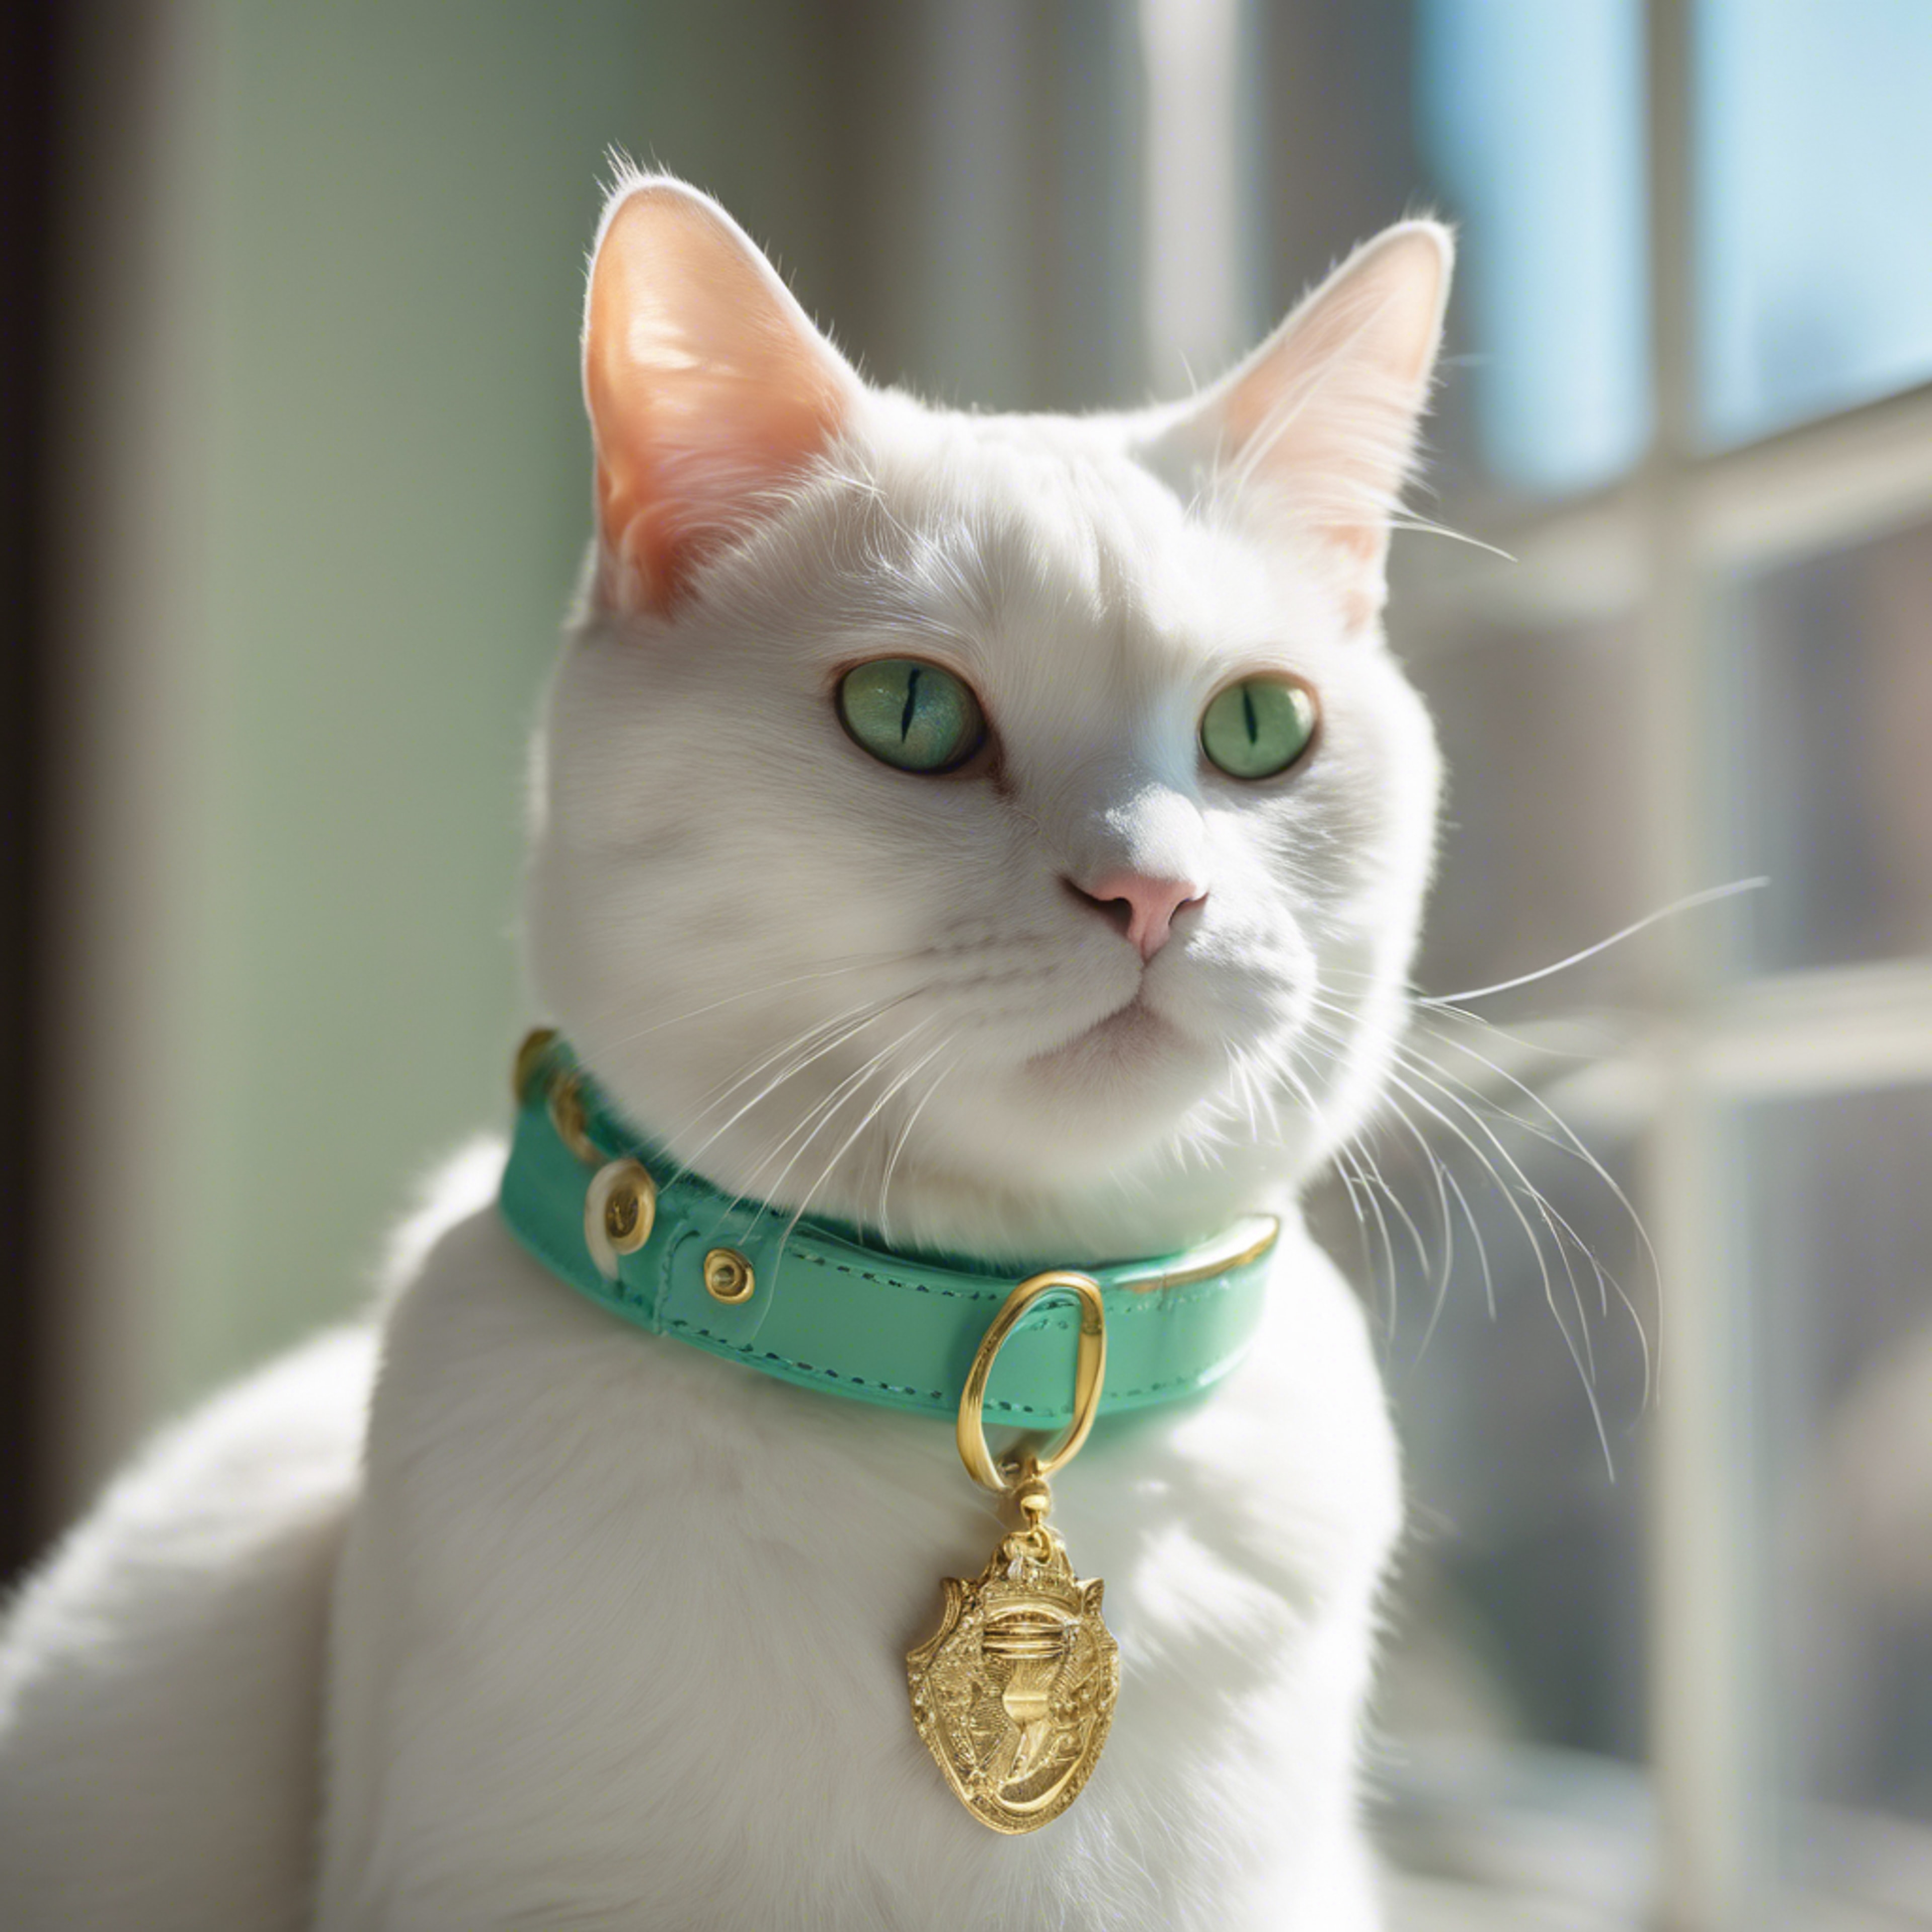 An adorable white cat wearing a preppy mint green collar with a gold buckle sitting in a sunny window.壁紙[8de0351476e04873aa5e]